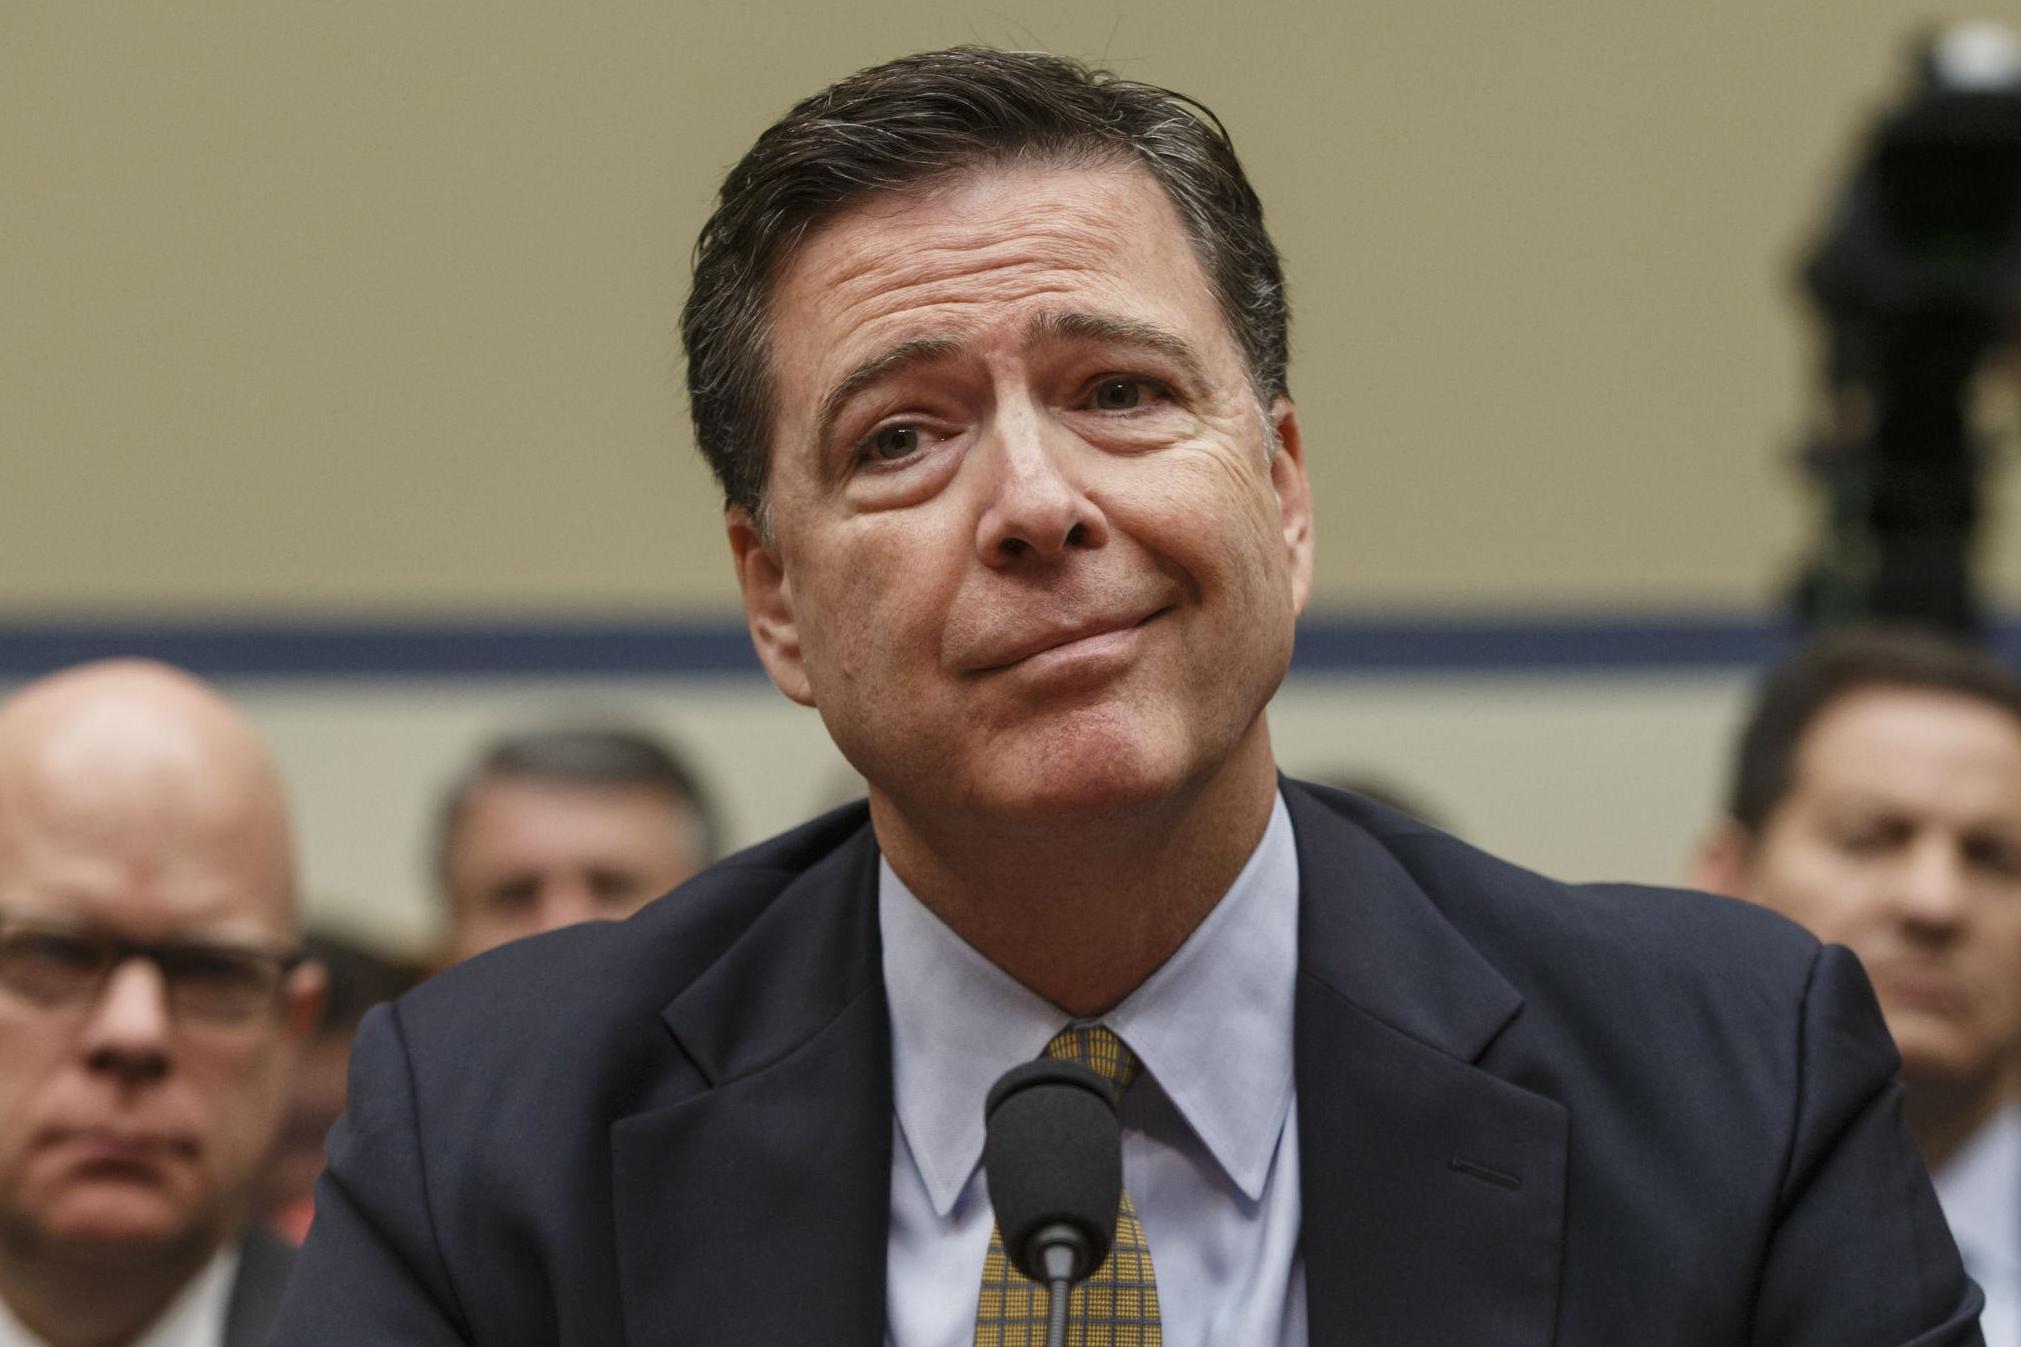 FBI Director James Comey tossed a "Molotov cocktail" into the election, one top Democrat claimed